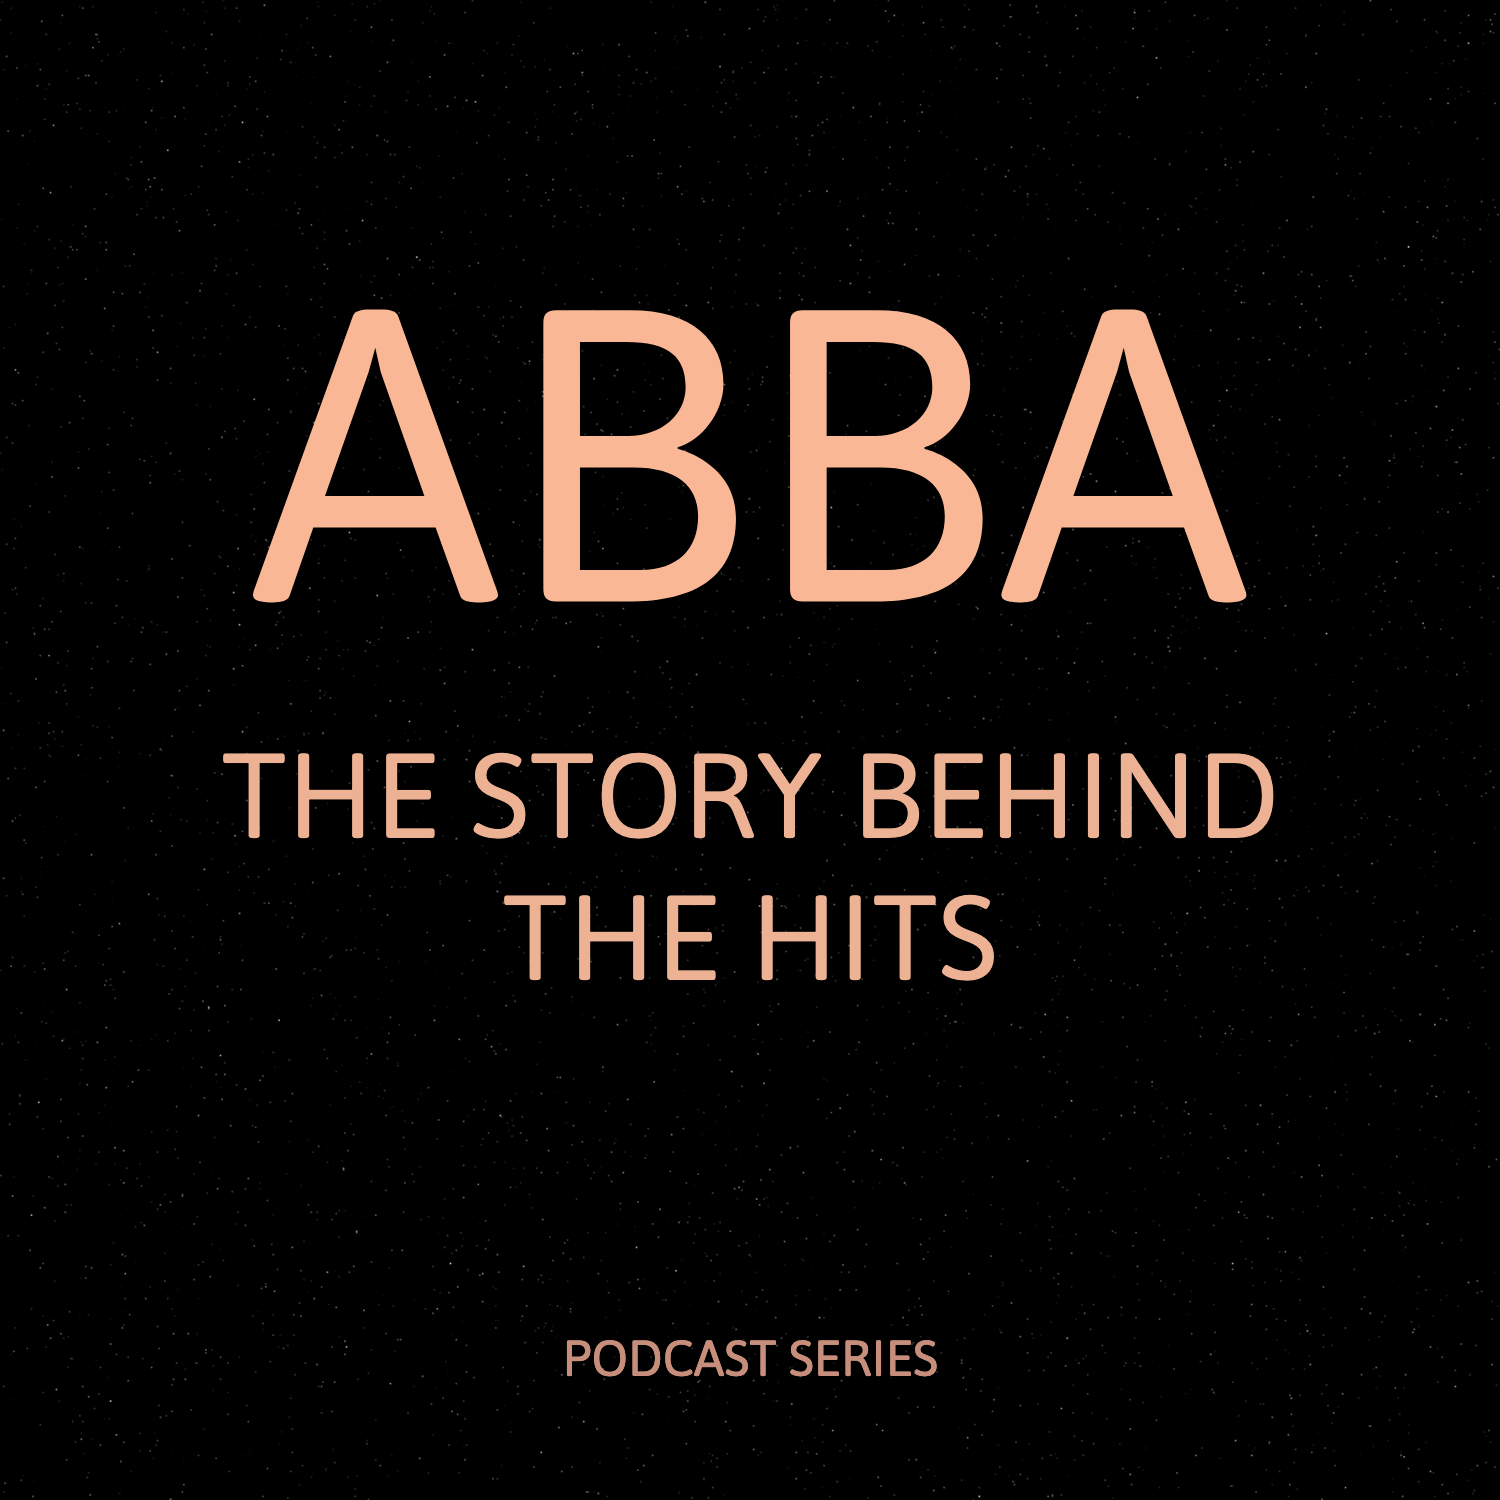 ABBA - THE STORY BEHIND THE HITS Podcast Series